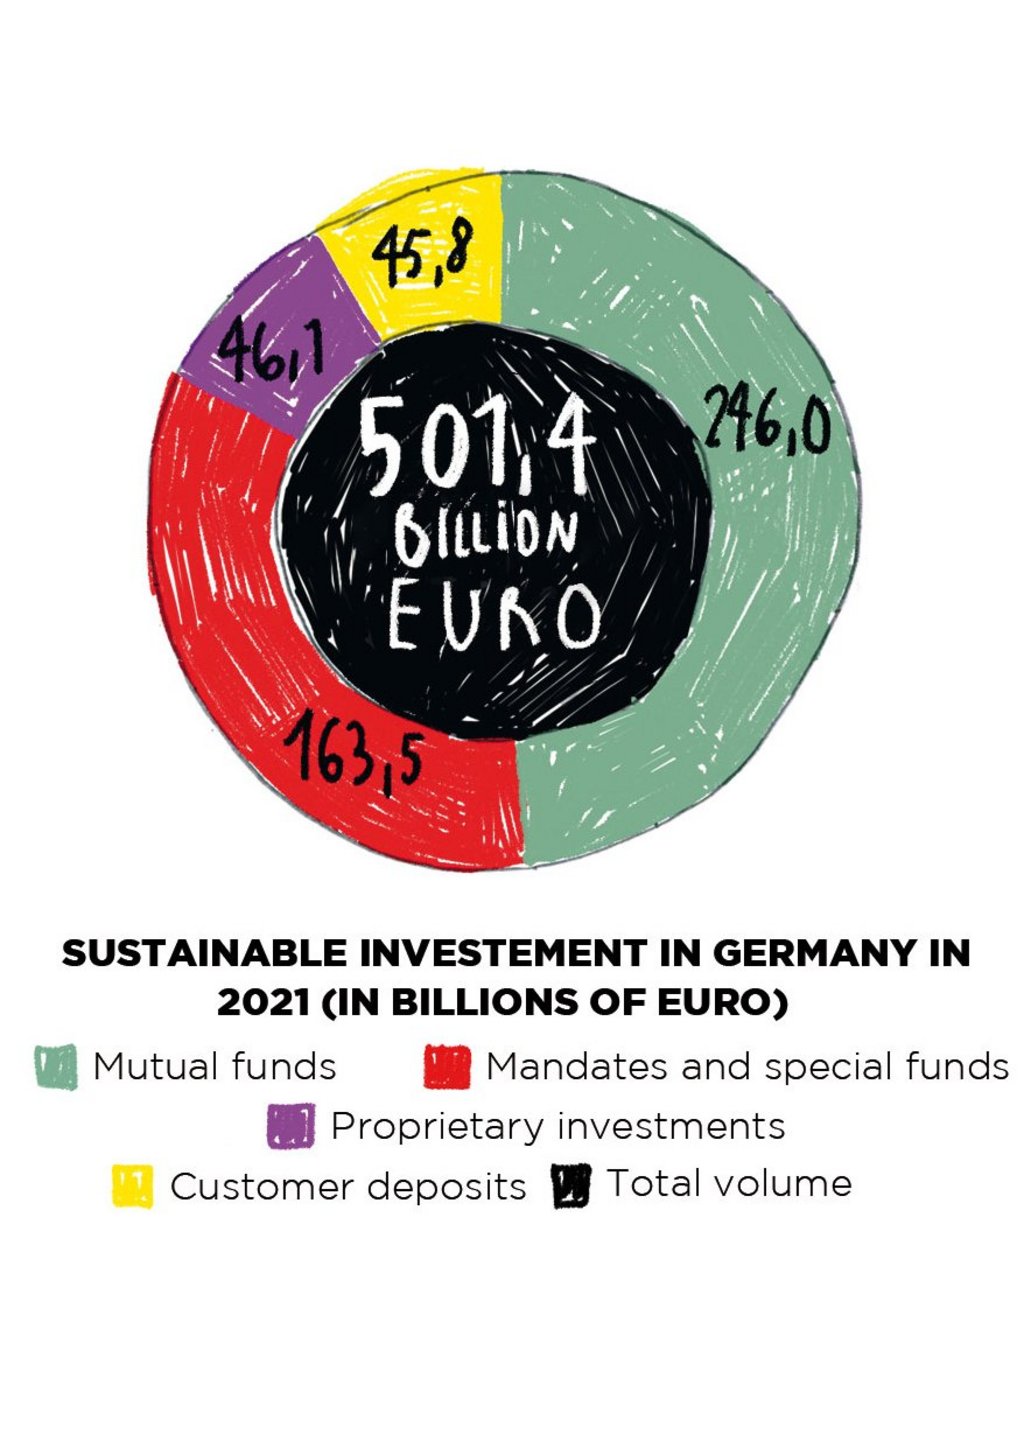 Illustration of a pie chart, in the middle of which stands with 501.4 billion euros the total number of euros invested in Germany. Around it, the distribution by fund is shown. The largest investment sum of 246 billion euros is in mutual funds.